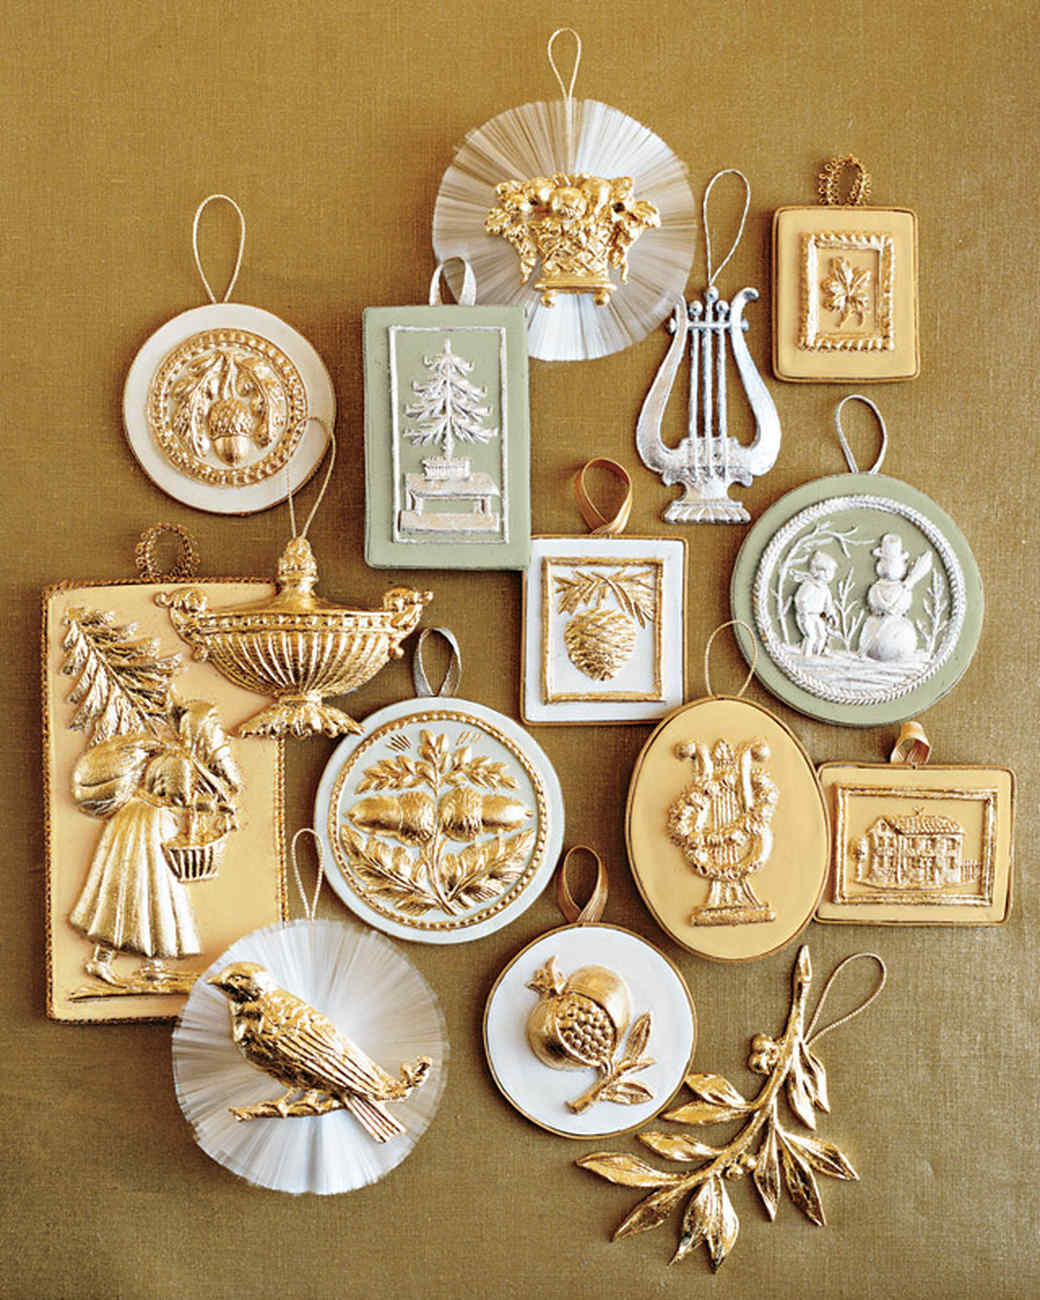 Best ideas about DIY Christmas Ornaments Martha Stewart
. Save or Pin 20 of Our Most Memorable DIY Christmas Ornament Projects Now.